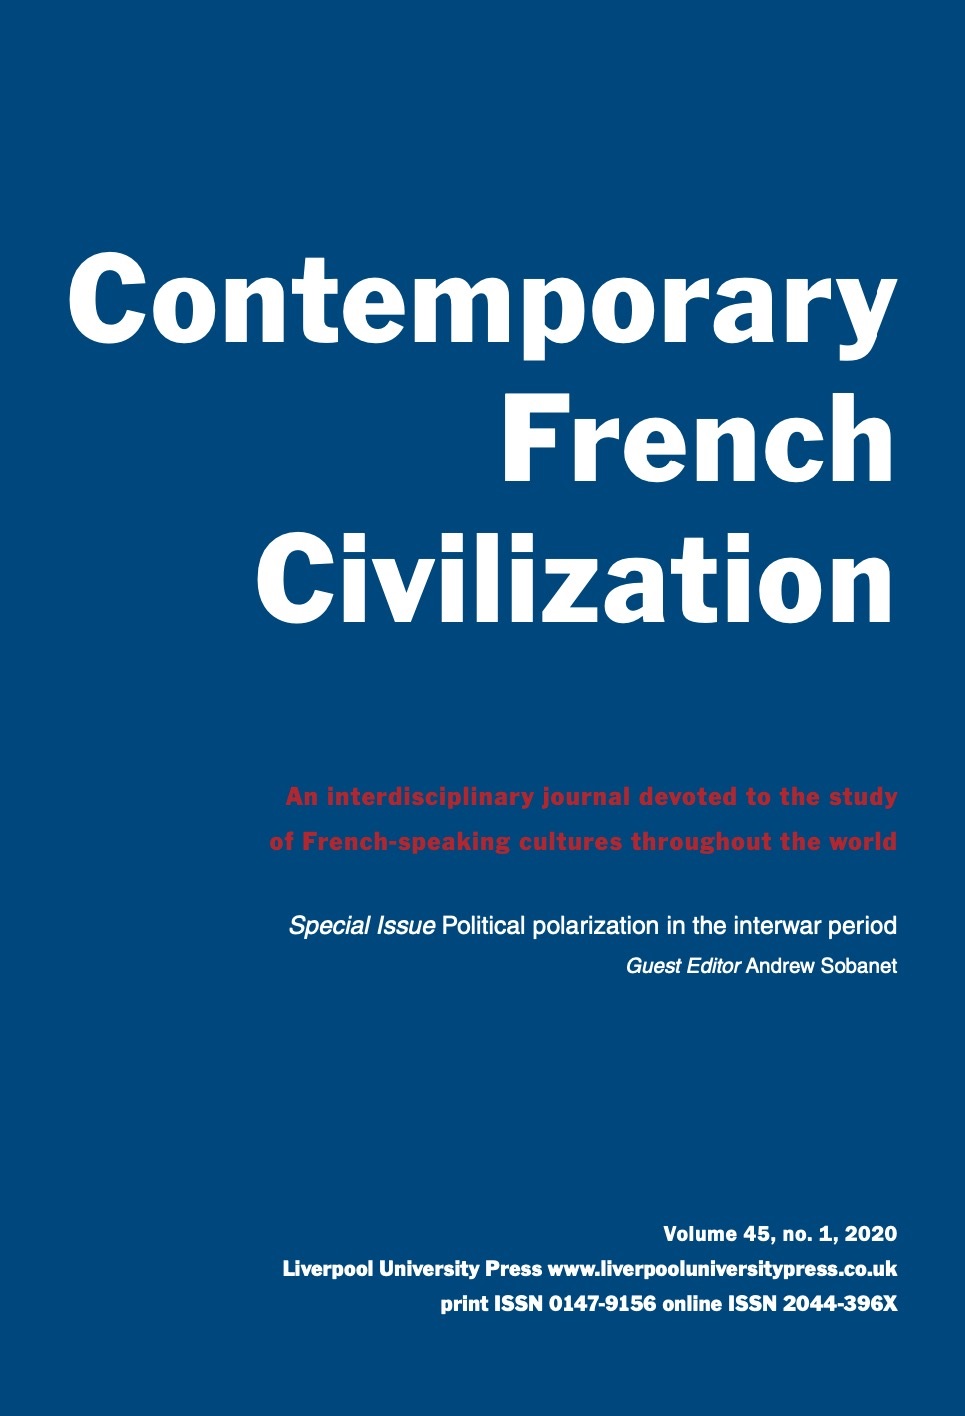 cover page of the journal Contemporary French Civilization